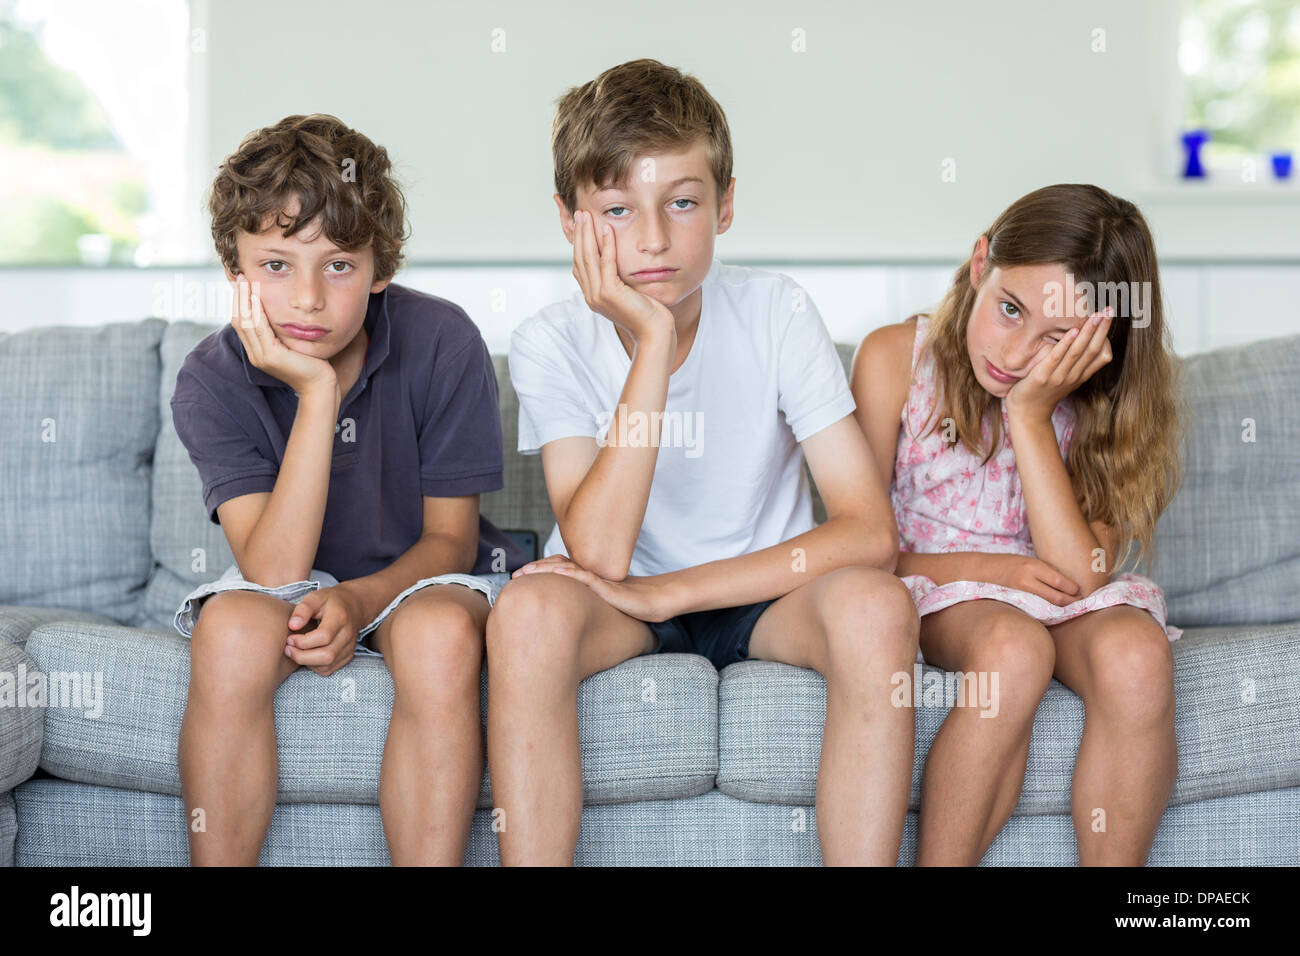 Brothers and sister on sofa looking bored Stock Photo